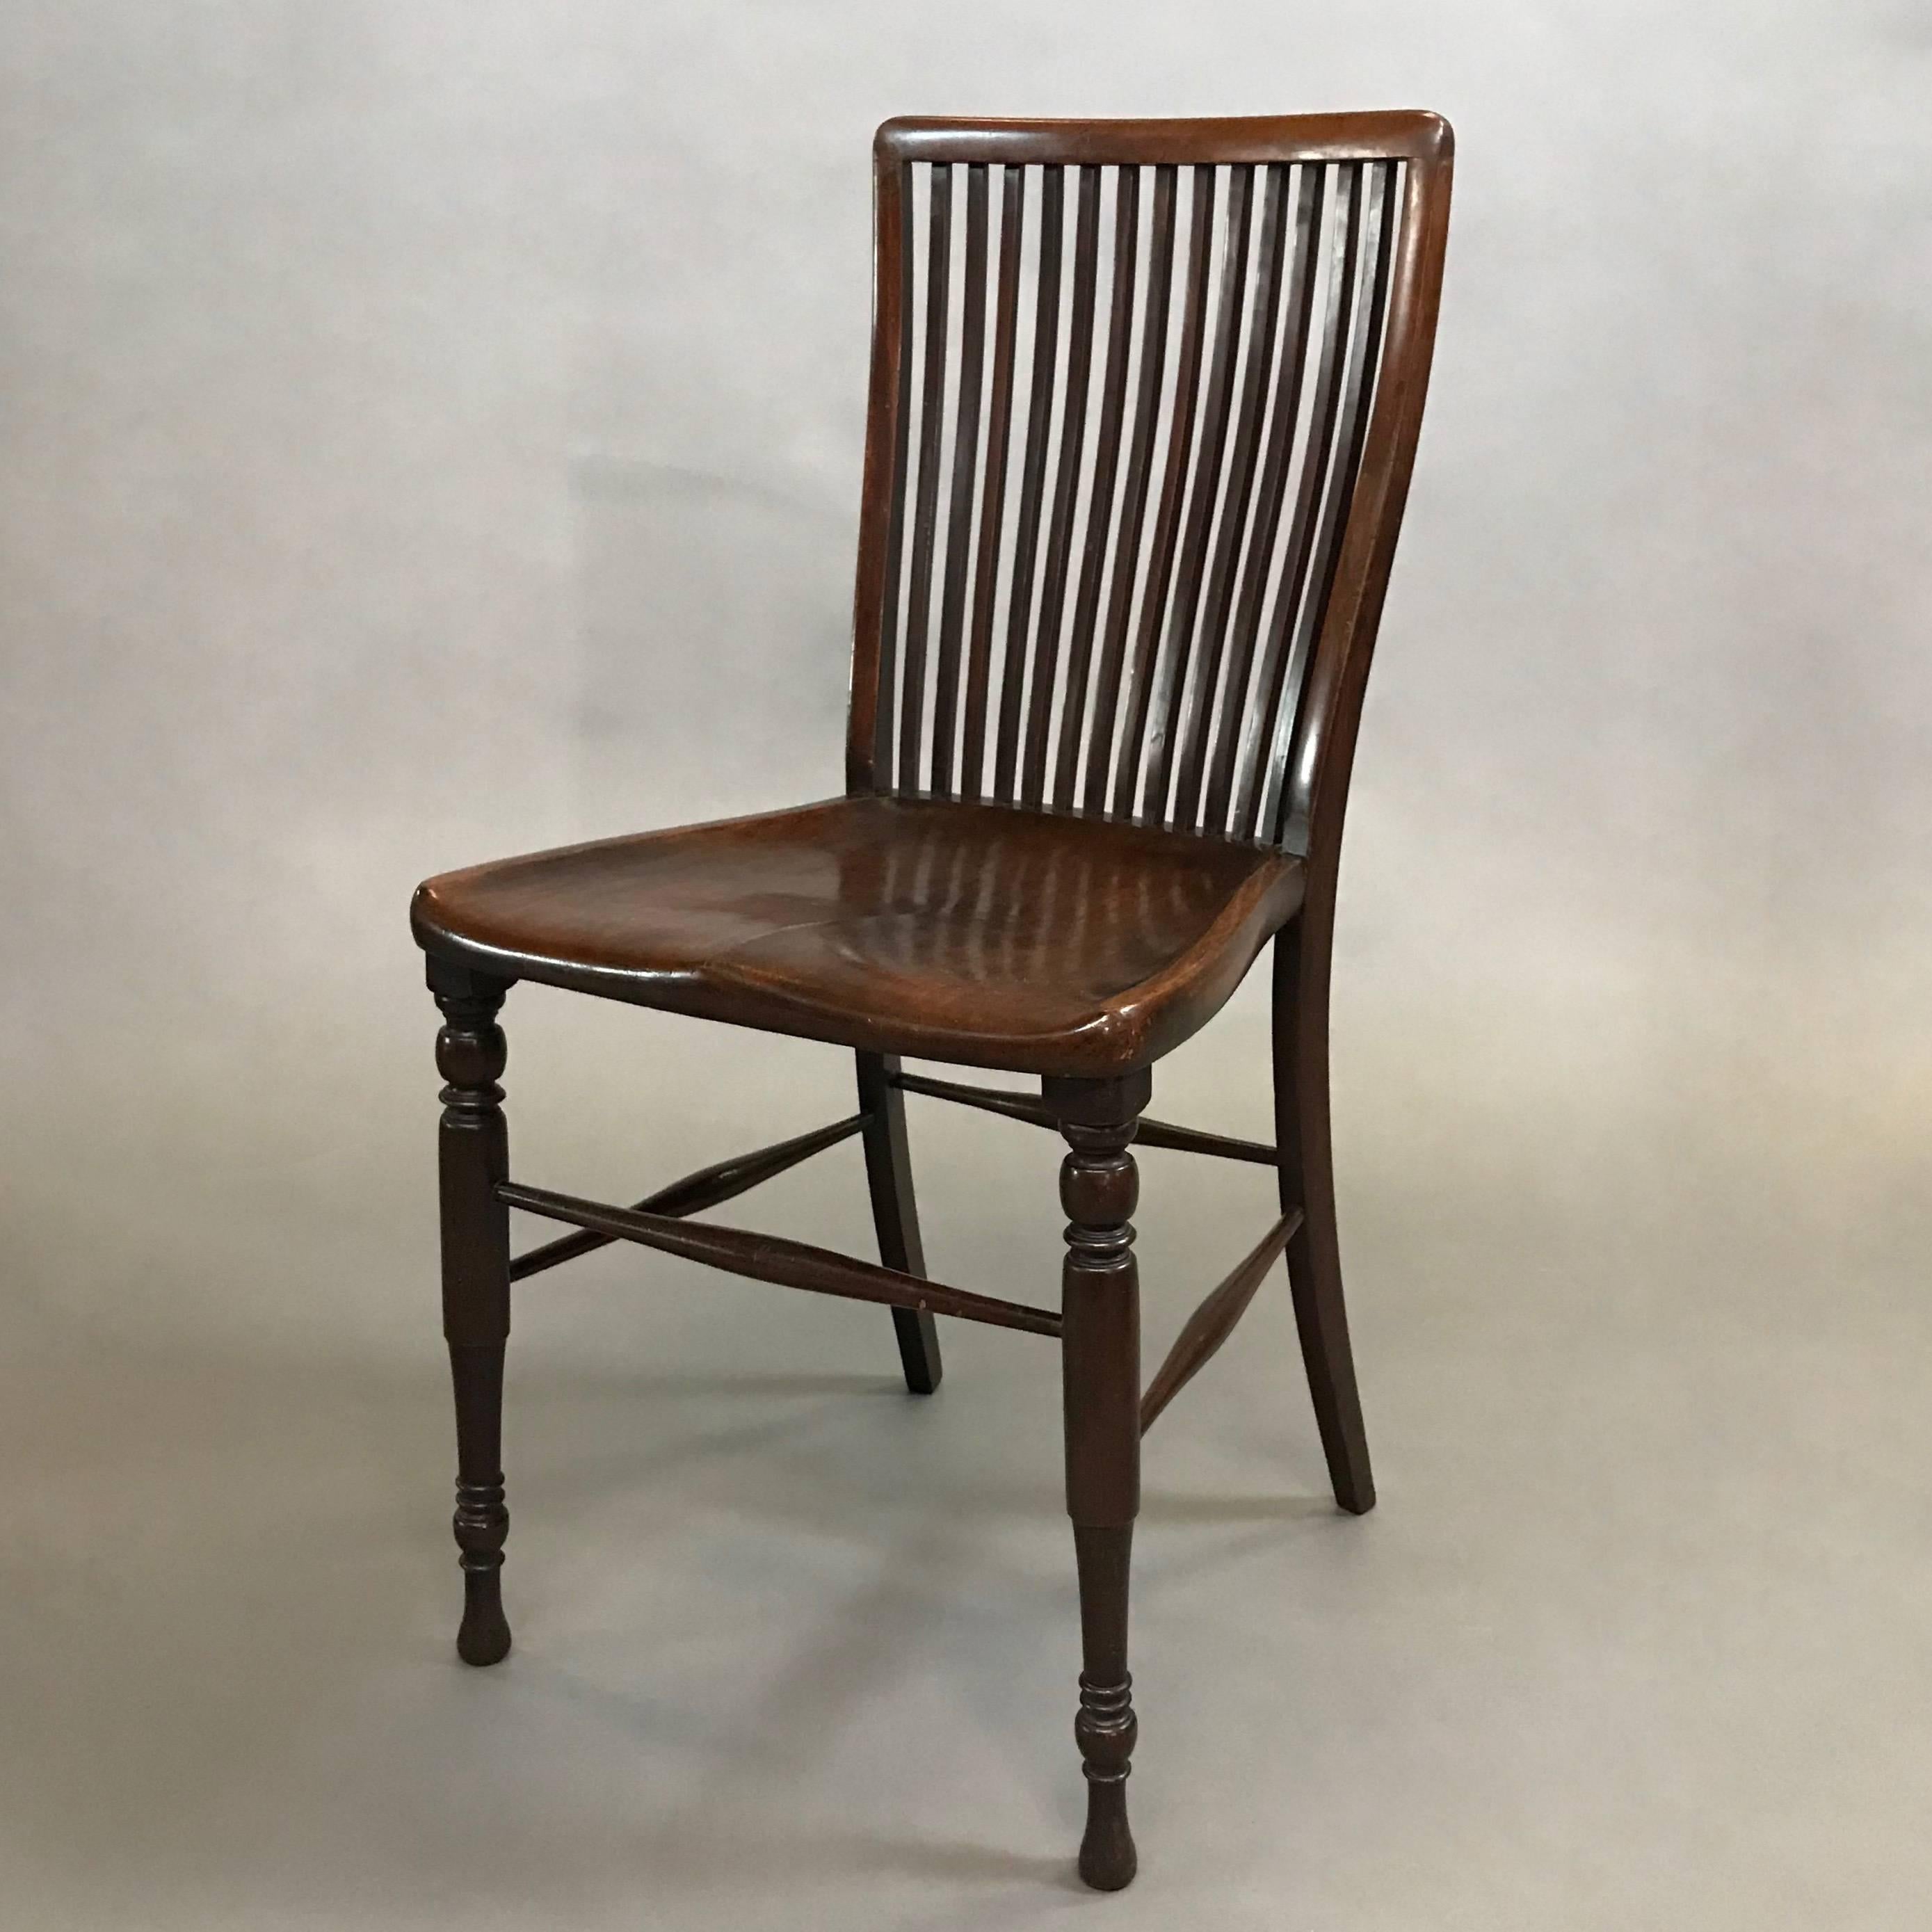 American Classical 19th Century Spindle Back Mahogany Accent Side Chair